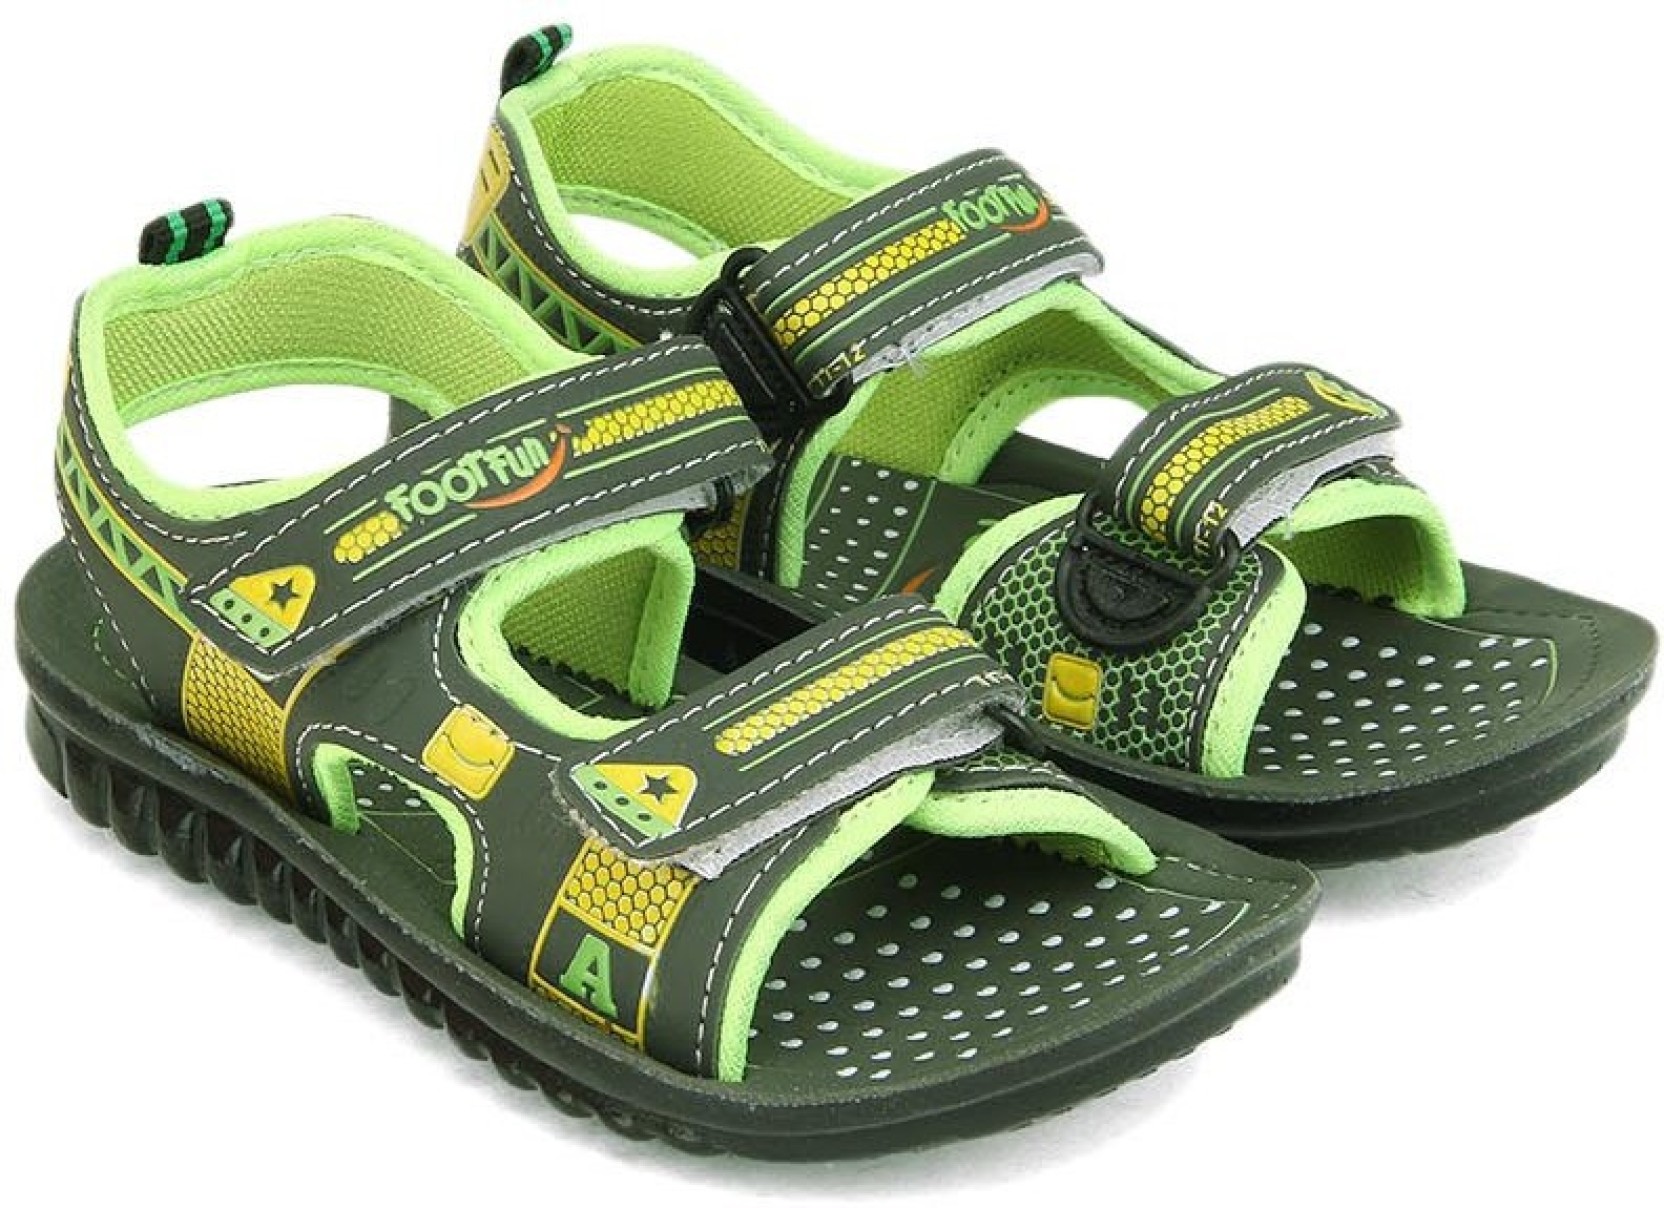 Liberty Boys Sports Sandals Price in India - Buy Liberty Boys Sports ...